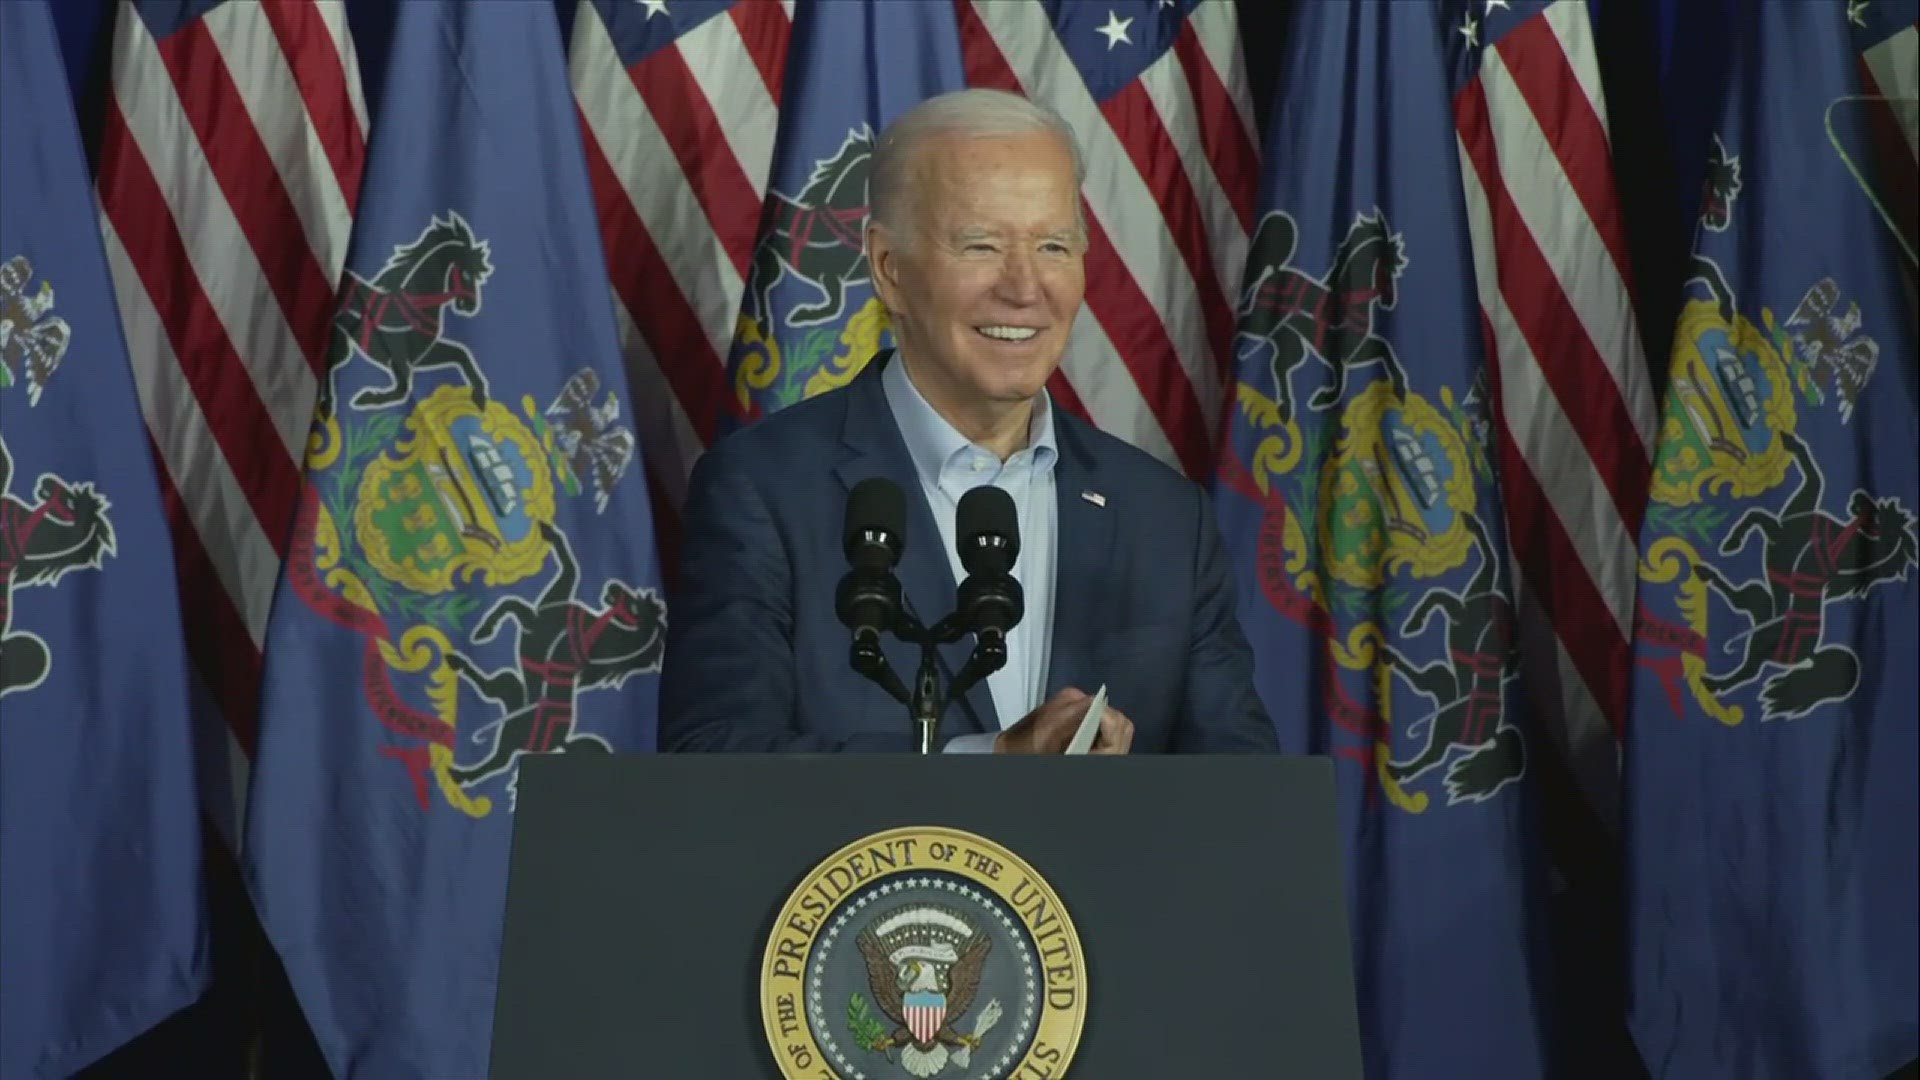 President Biden arrives in Scranton to speak about the economy during a three-day visit to the Keystone State.